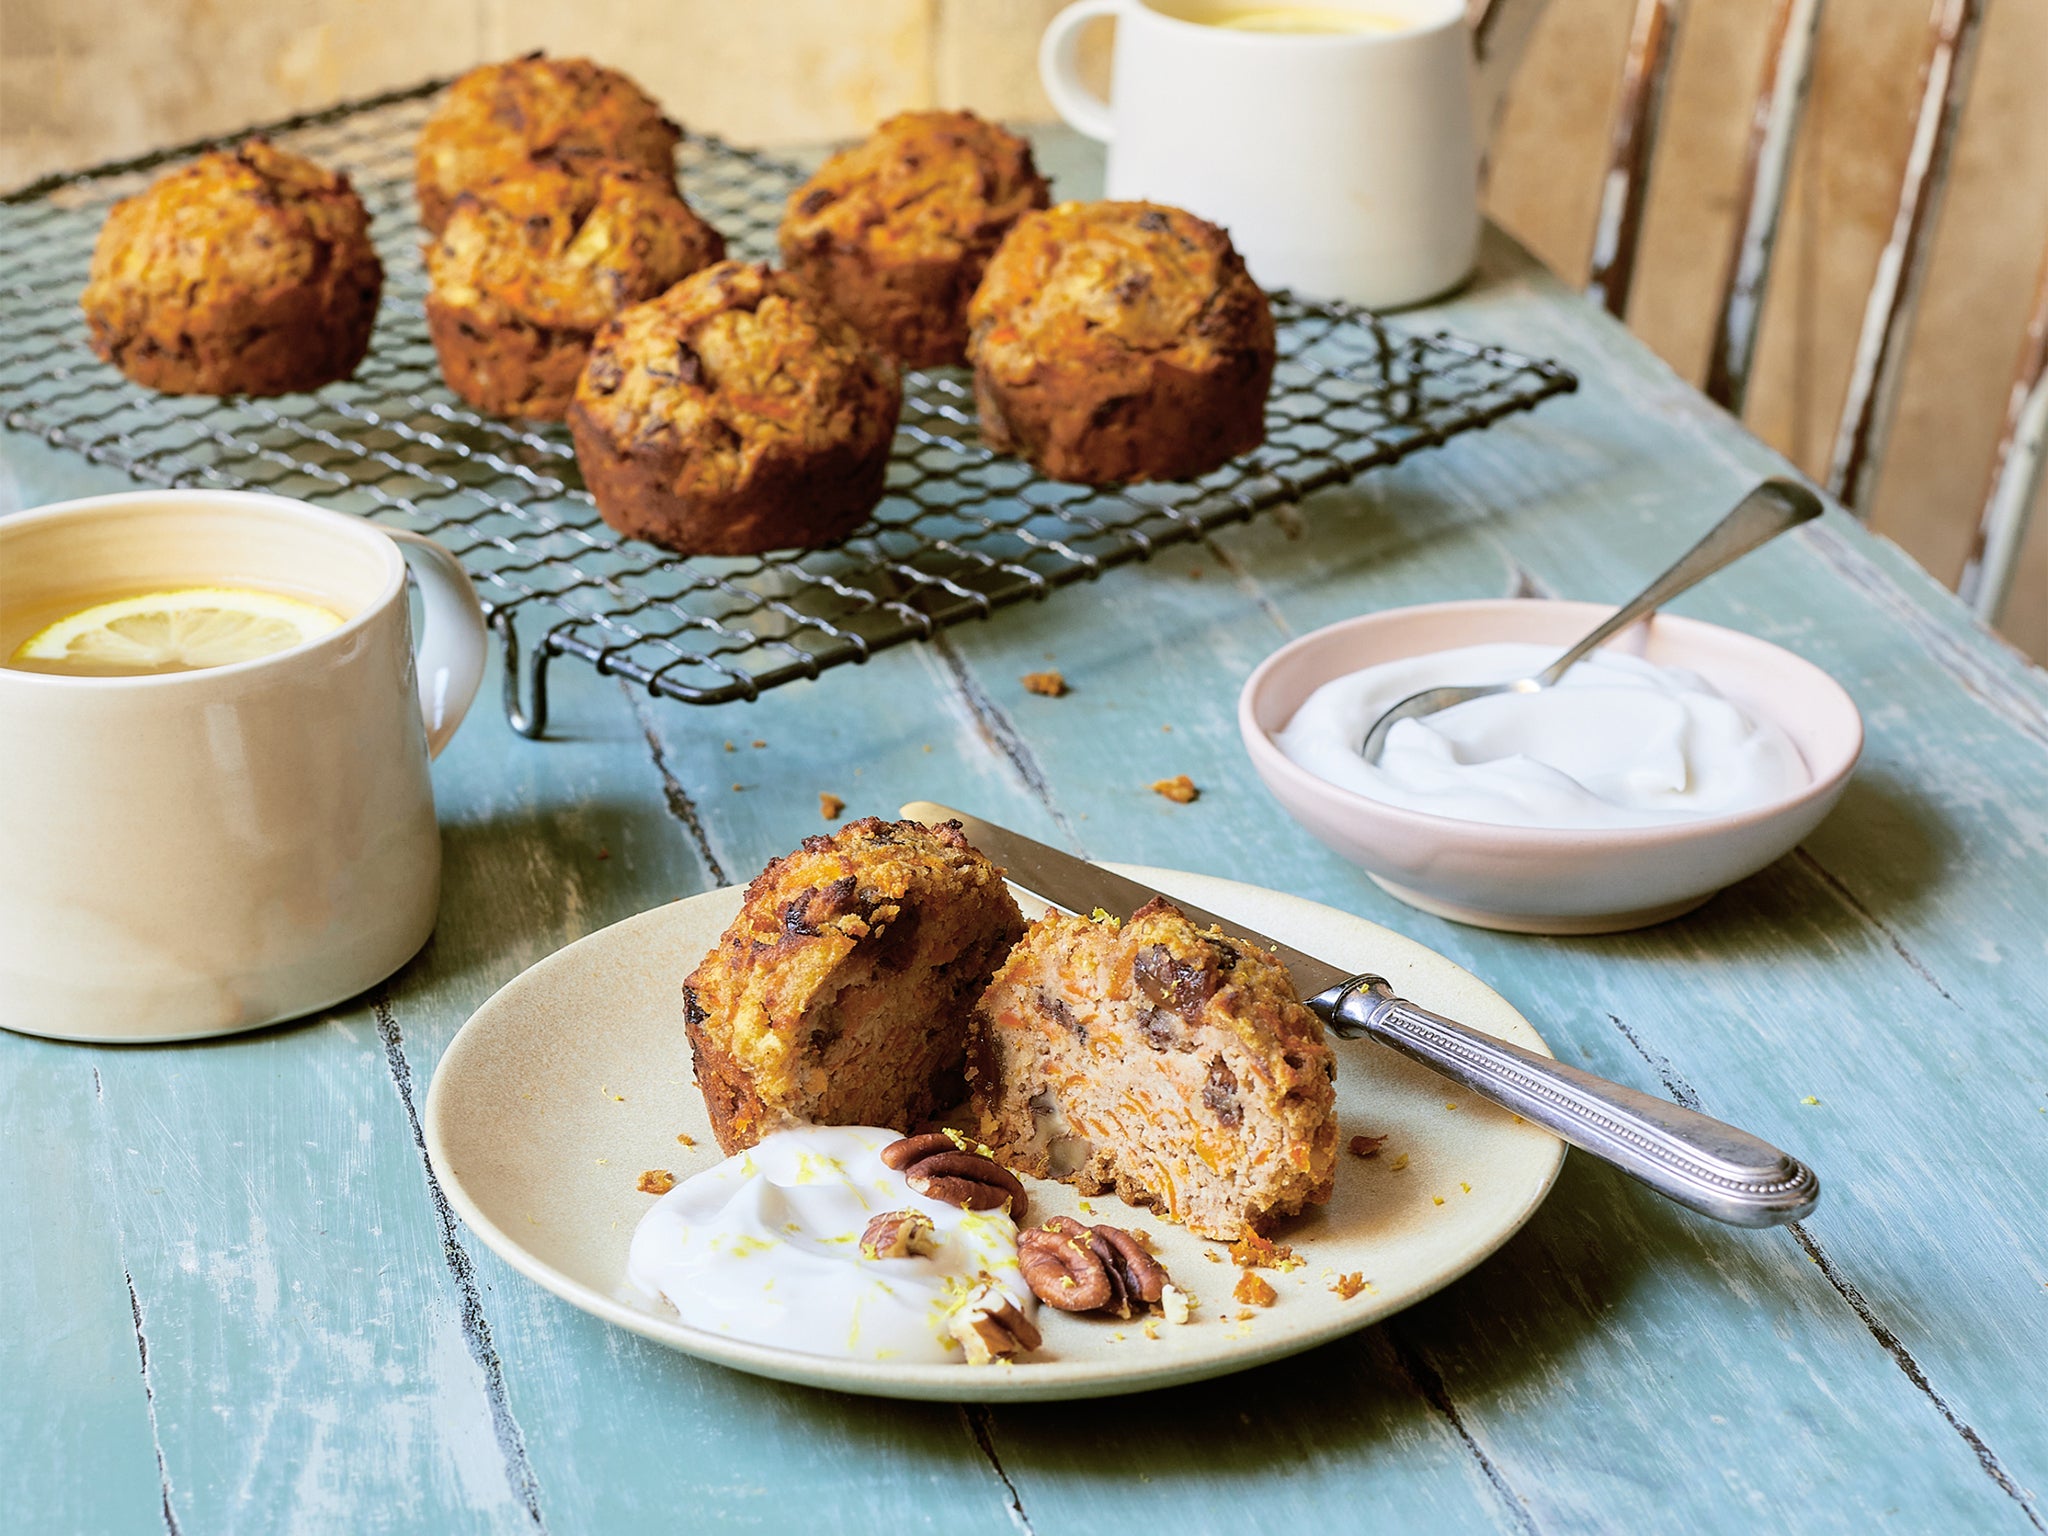 These muffins will leave you feeling full without a blood sugar spike